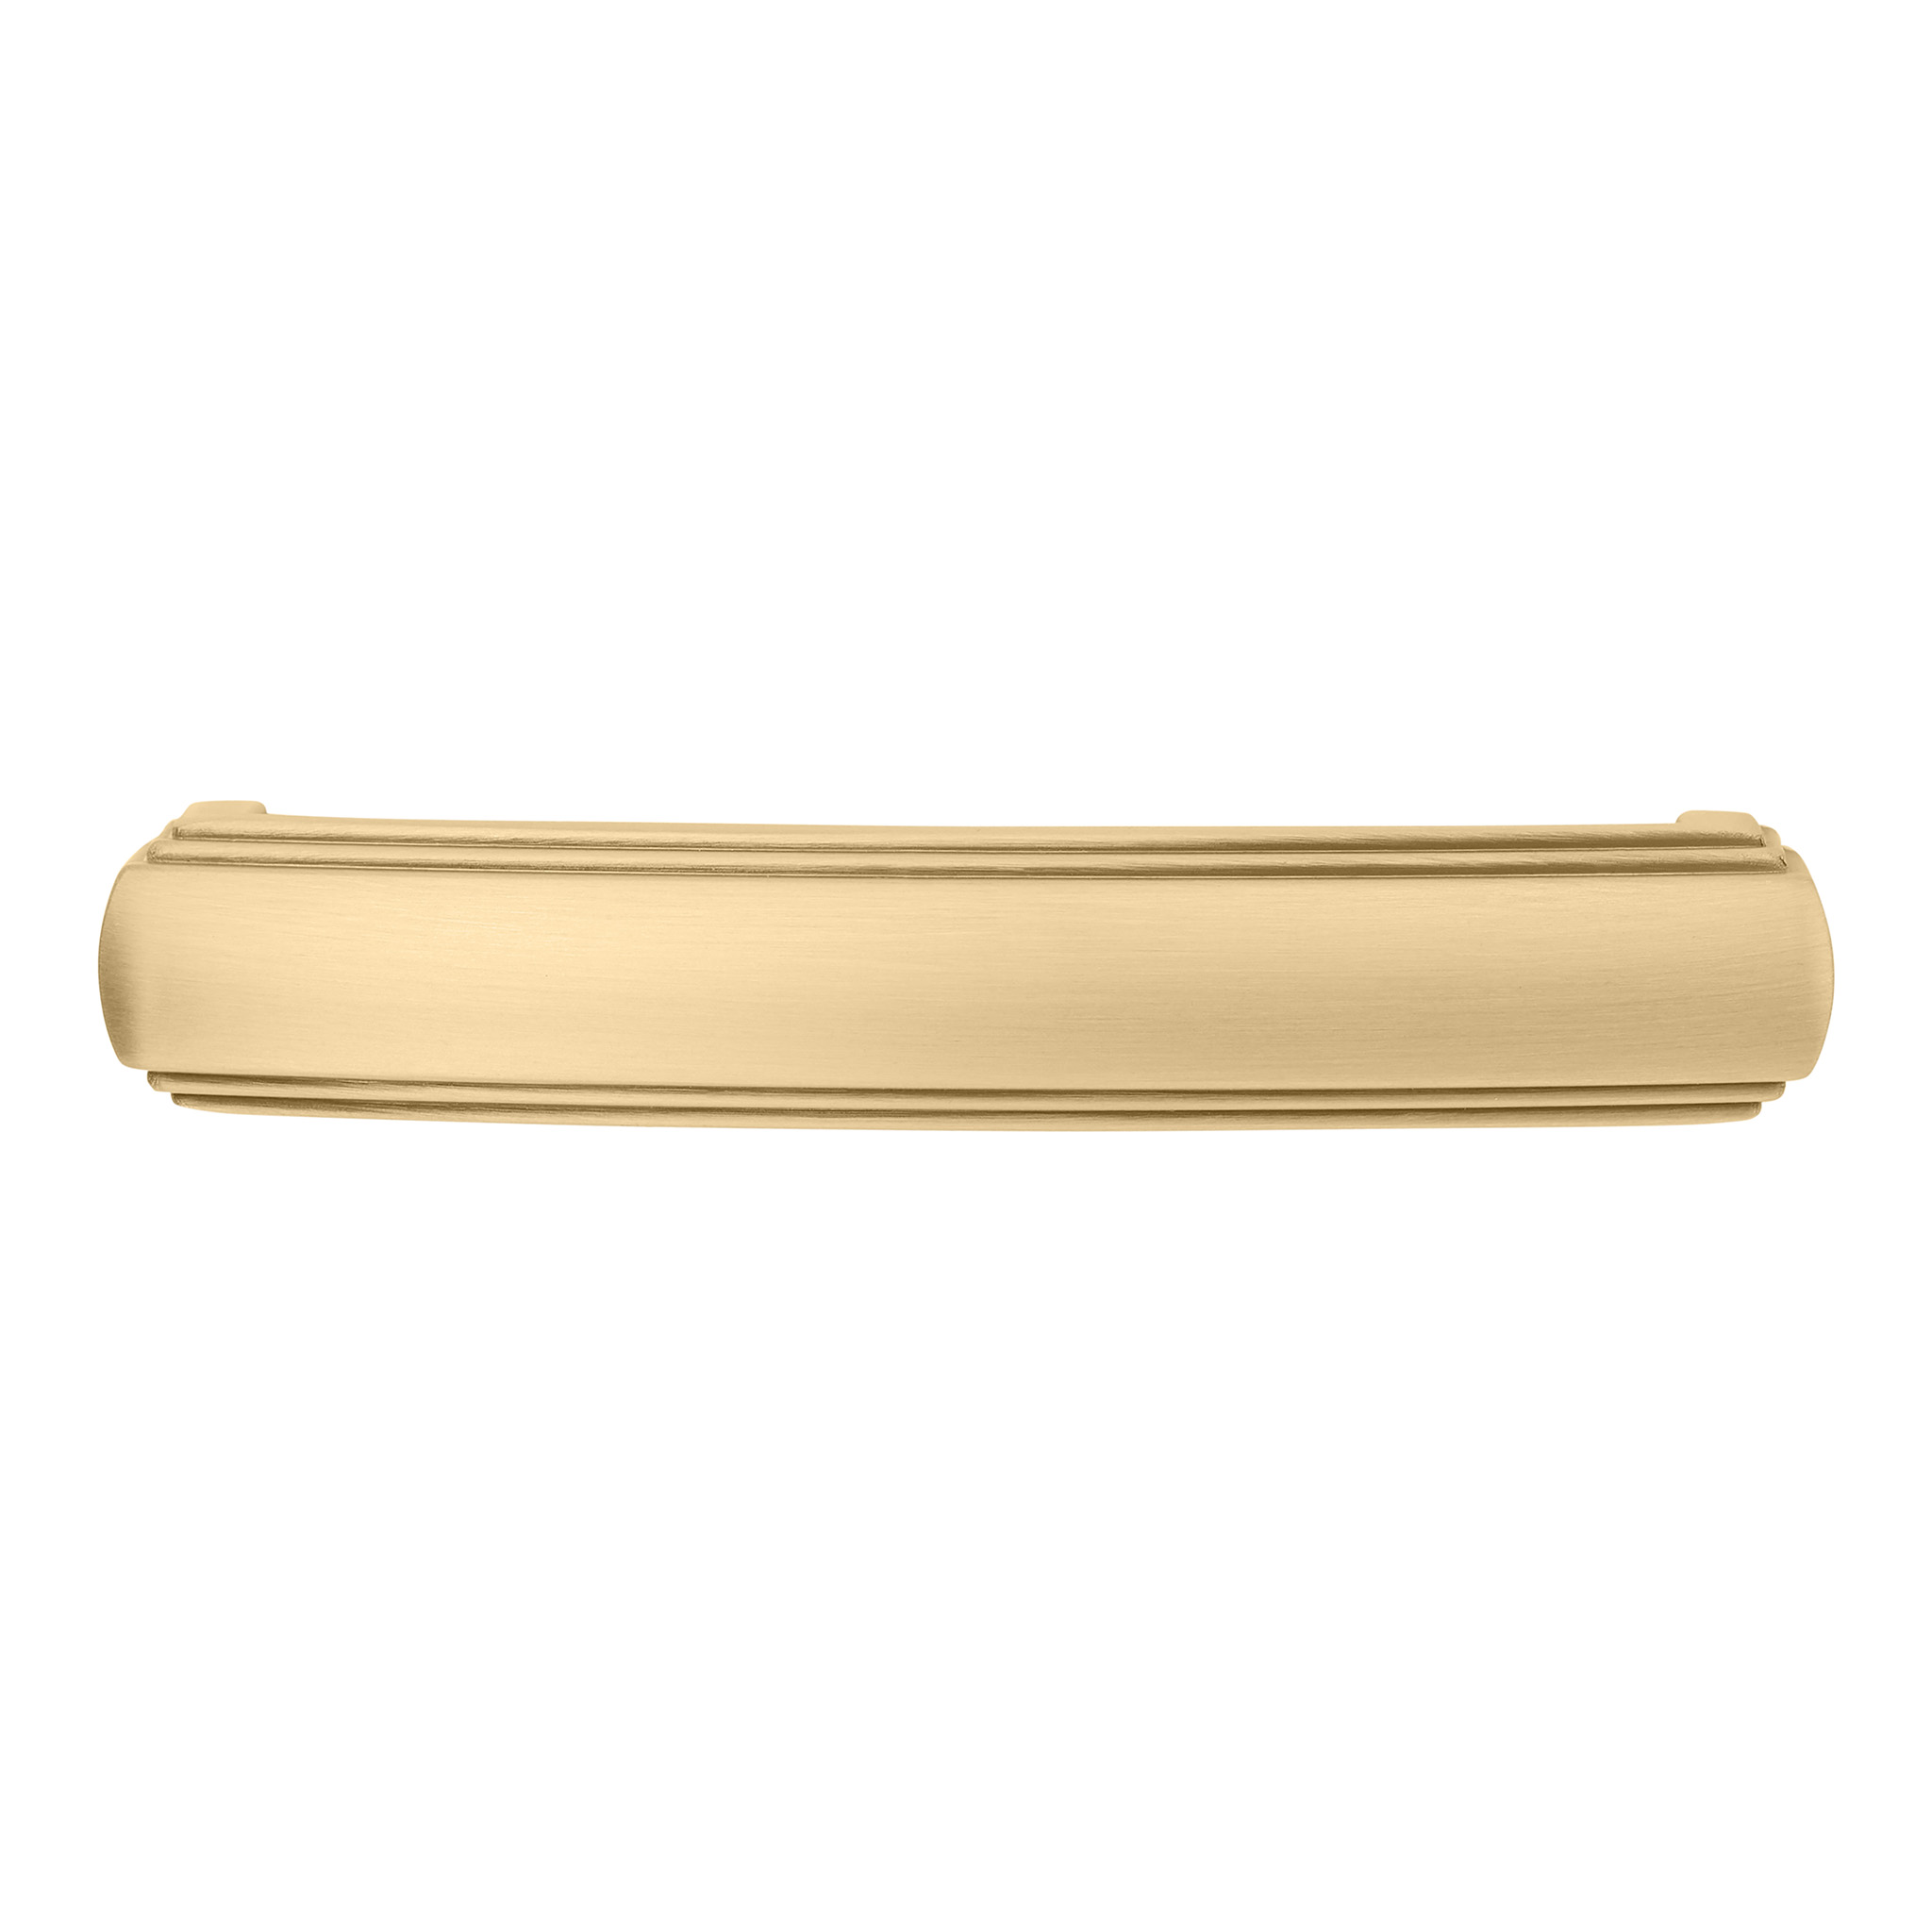 Montague Transitional Pull, 96mm, Brushed Brass